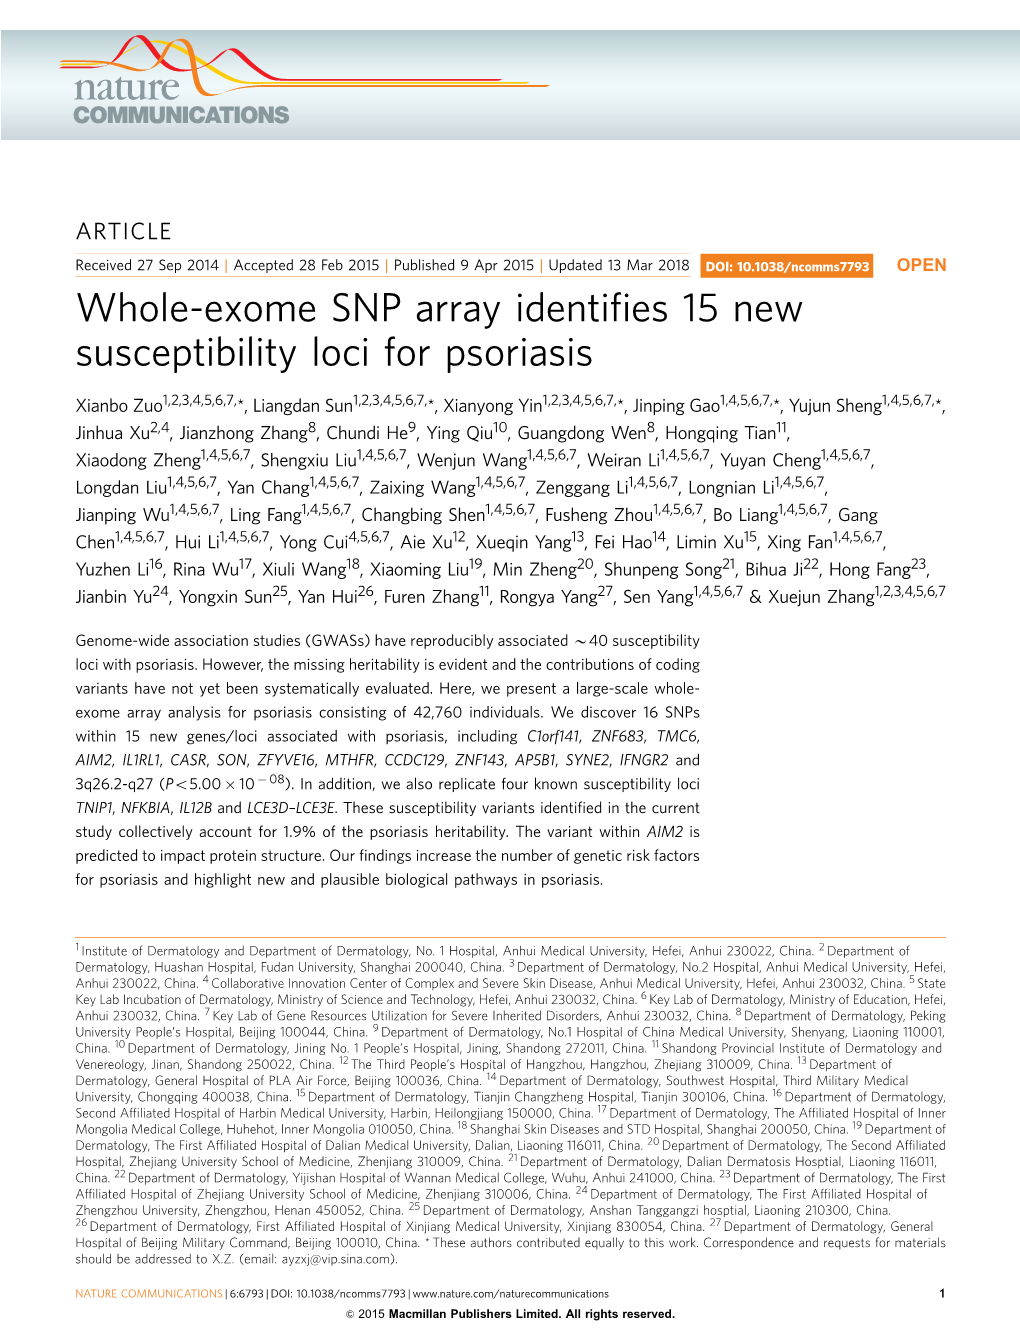 Whole-Exome SNP Array Identifies 15 New Susceptibility Loci for Psoriasis